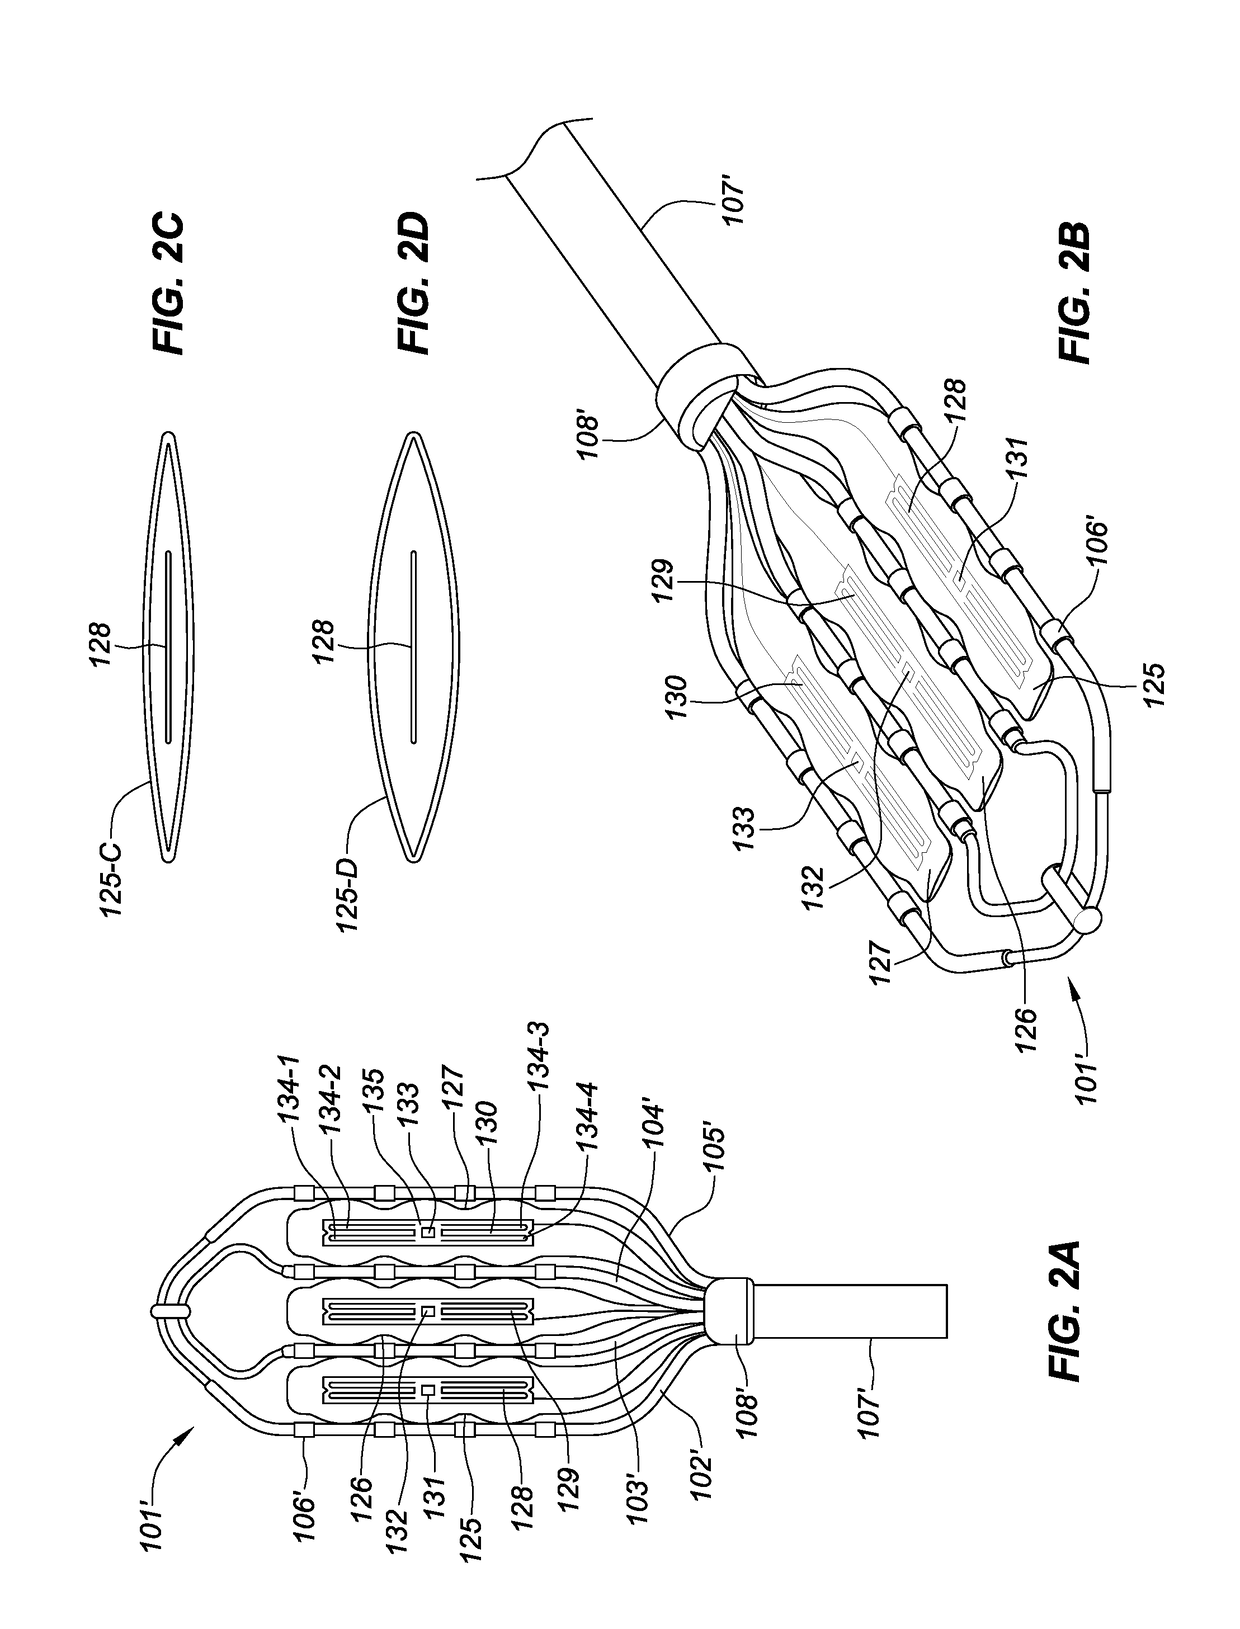 Thermal mapping catheter